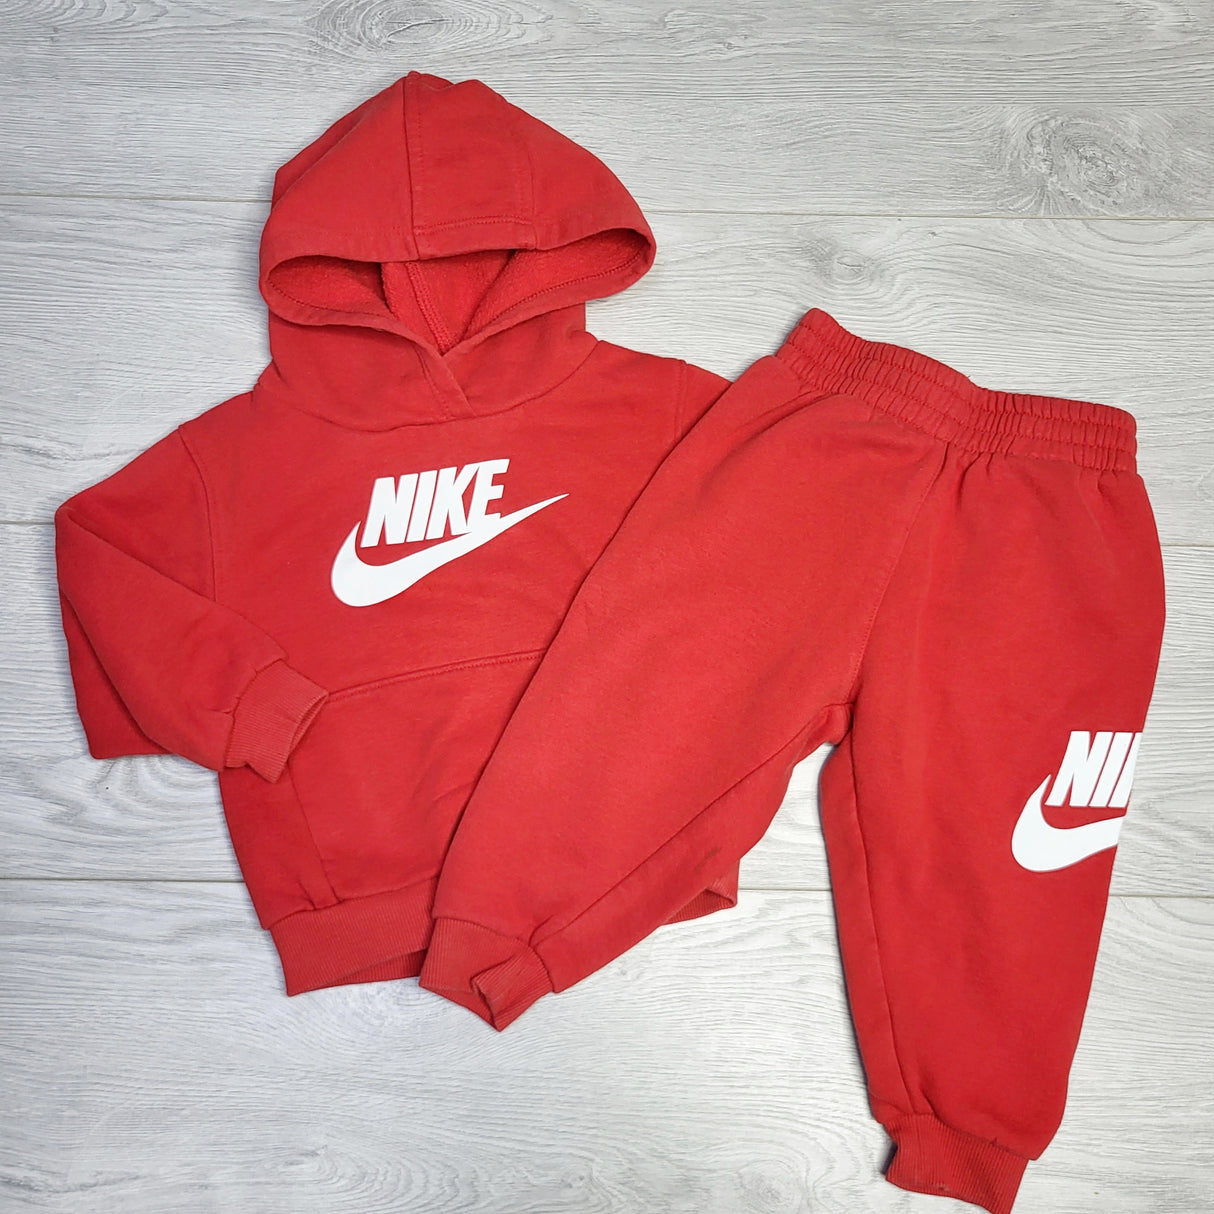 HWIL1 - Nike red cotton 2pc hoodie set. Size 18 months